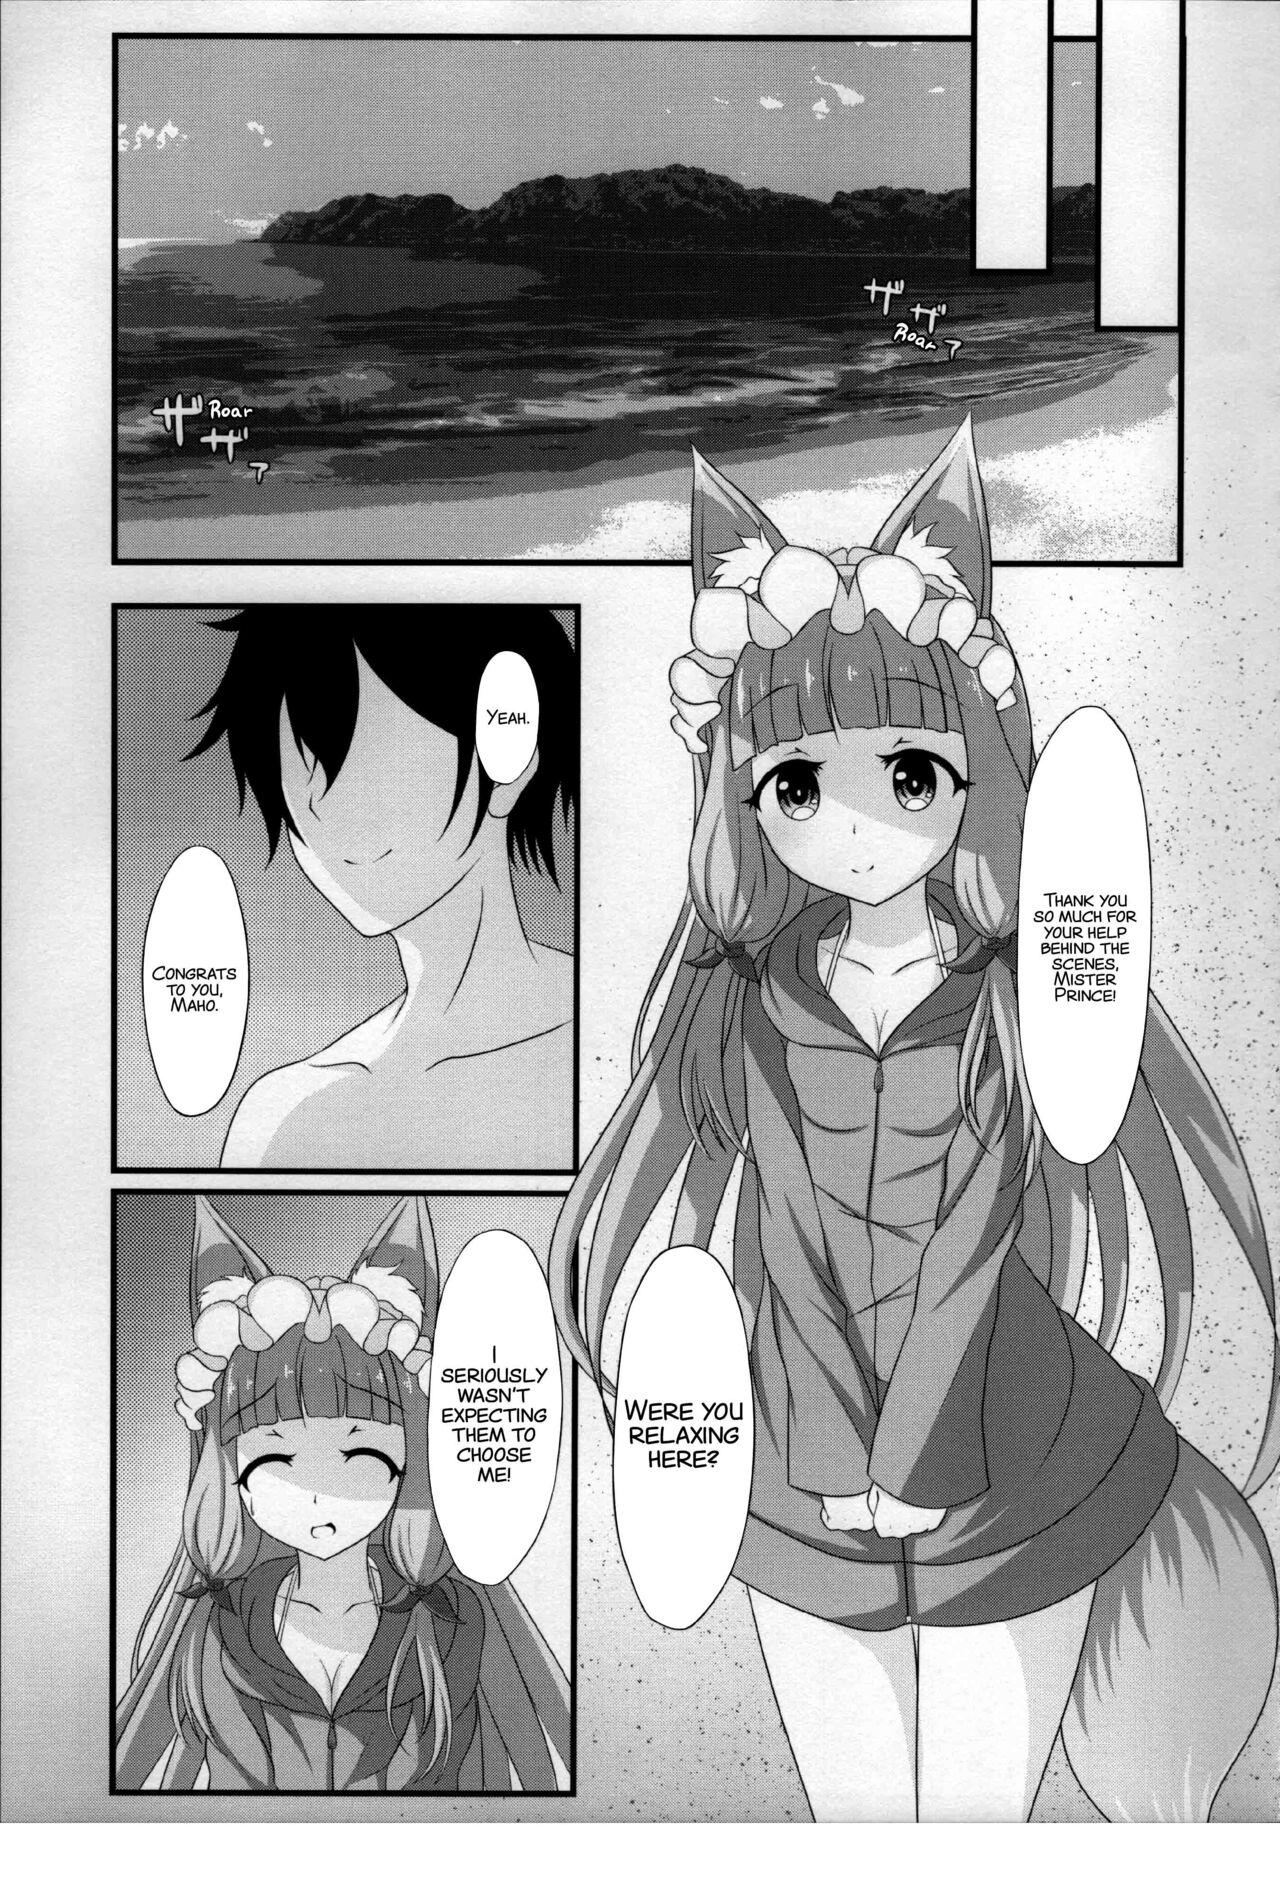 Beauty Maho Hime Connect! 2 - Princess connect Assfucking - Page 6